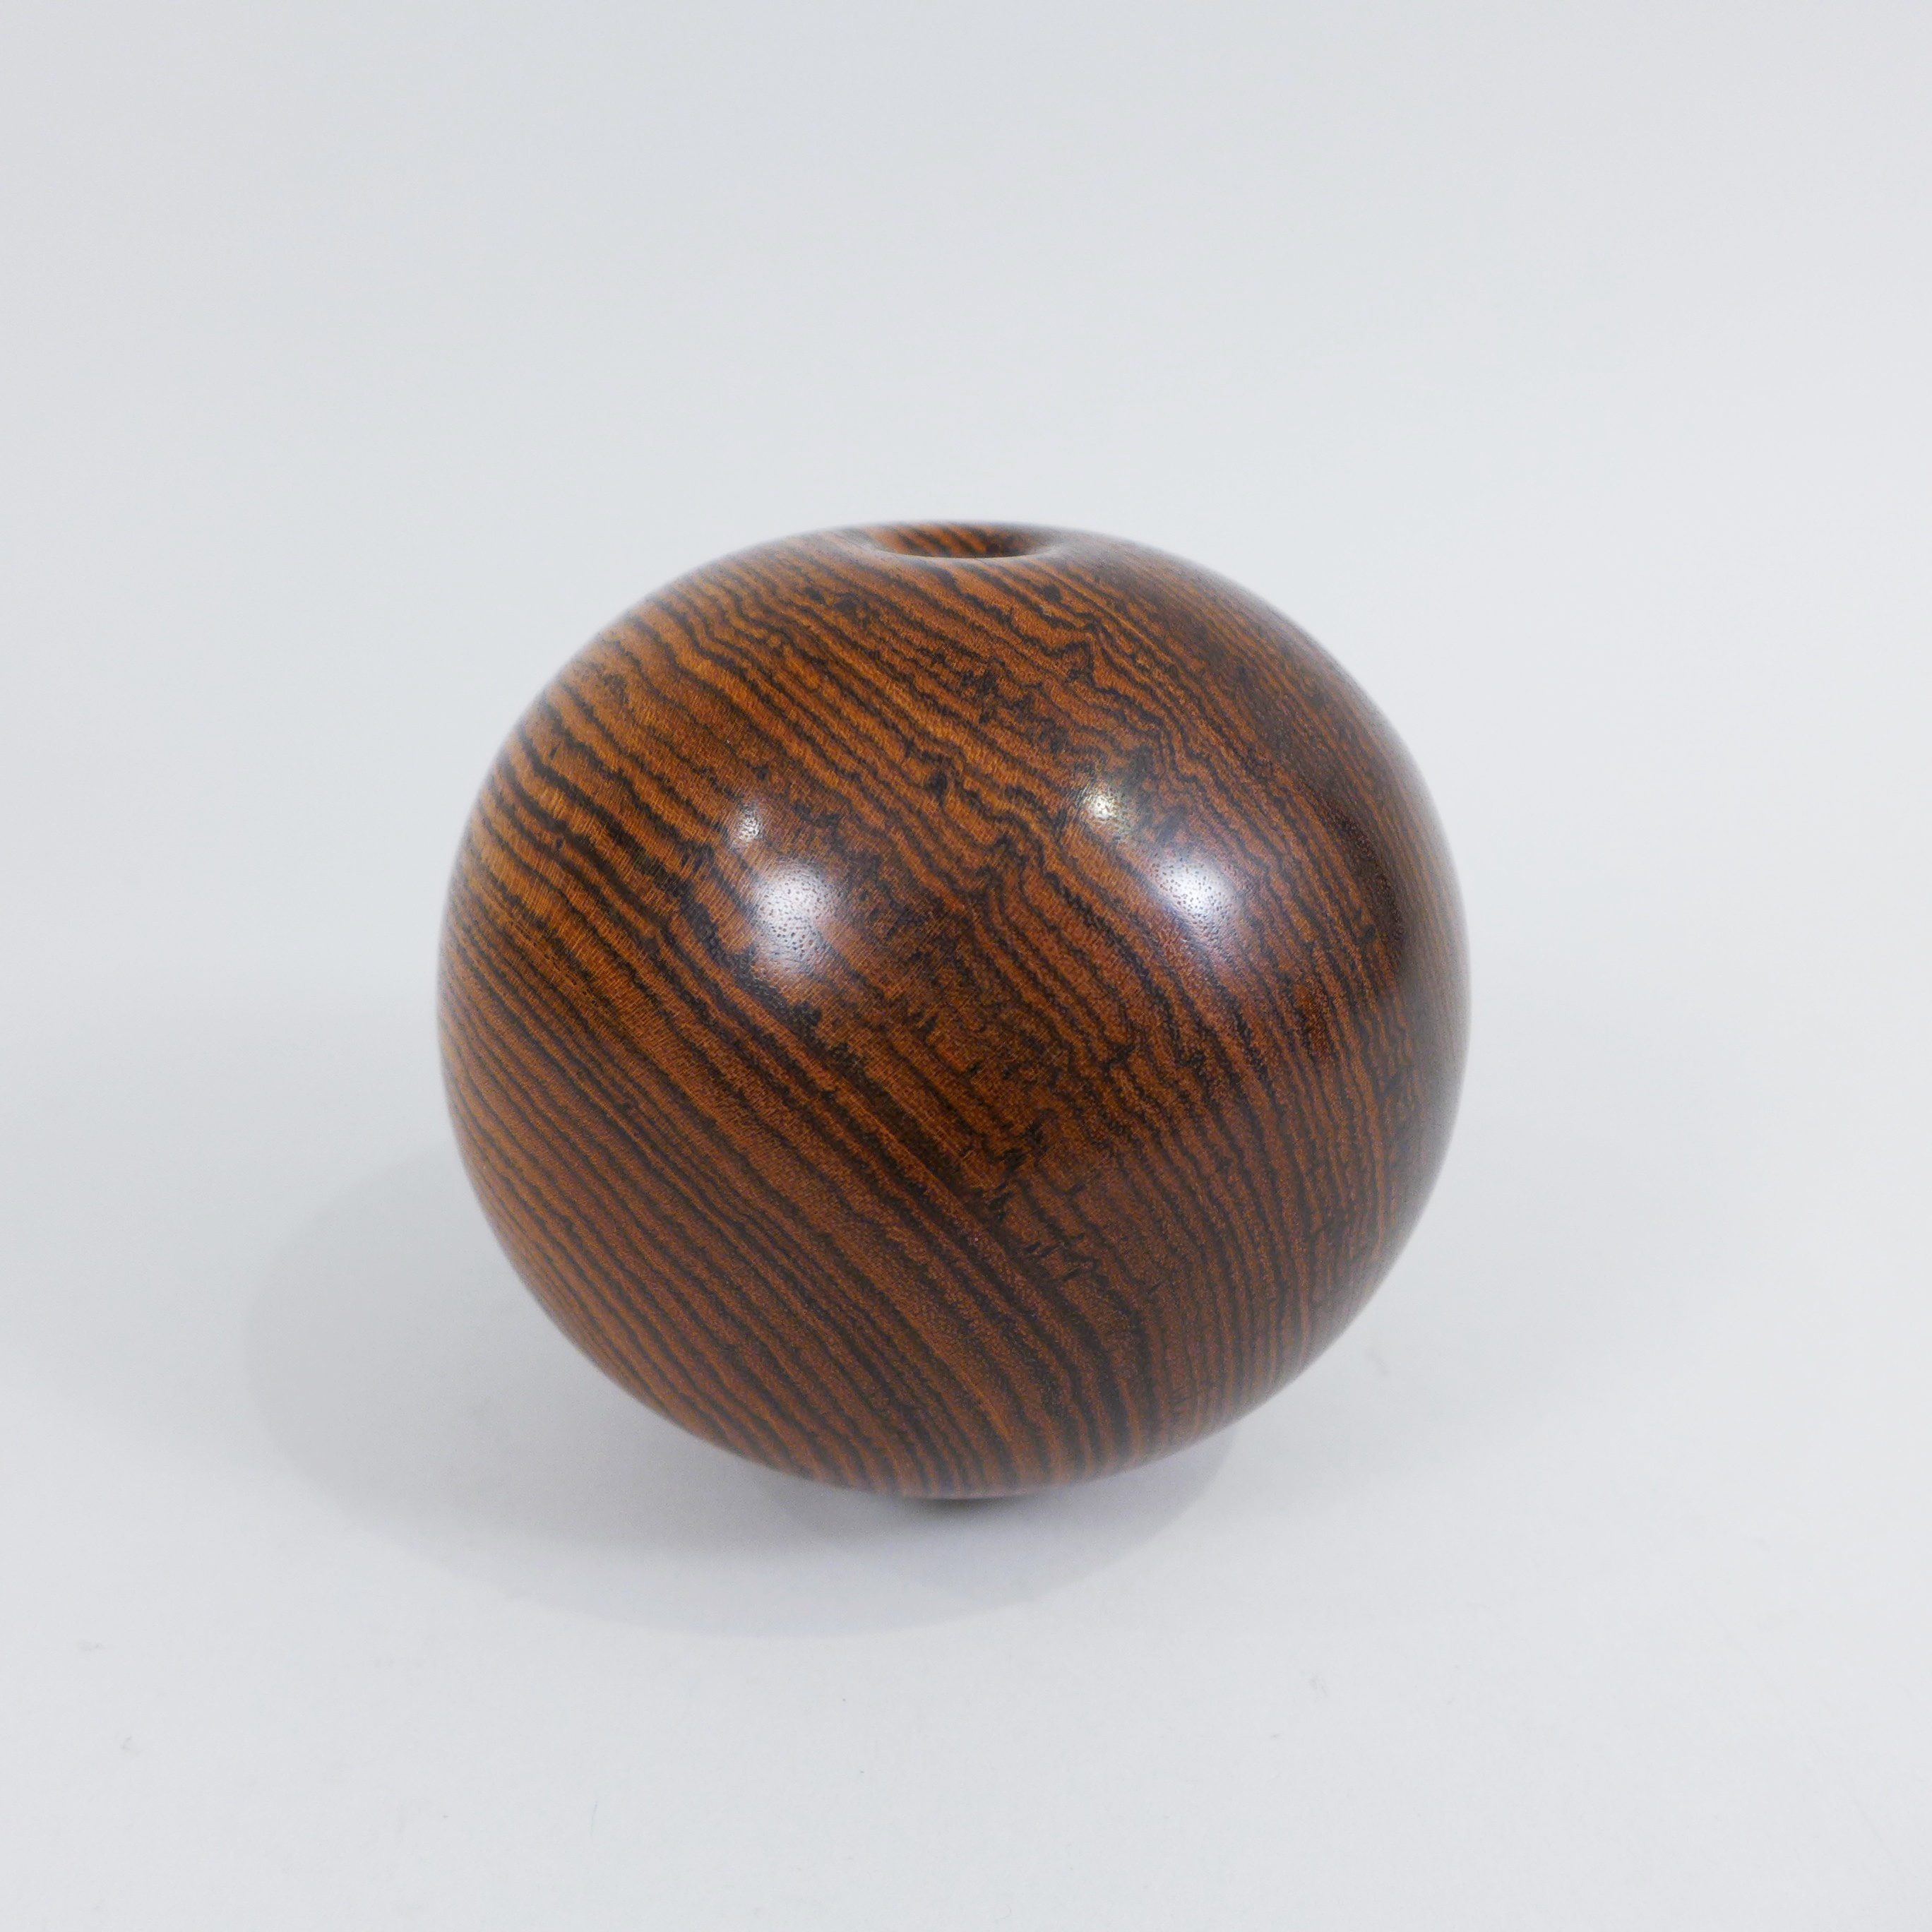 Delicate turned wood vessels by master American craftsman David Ellsworth at the Center for Art in Wood